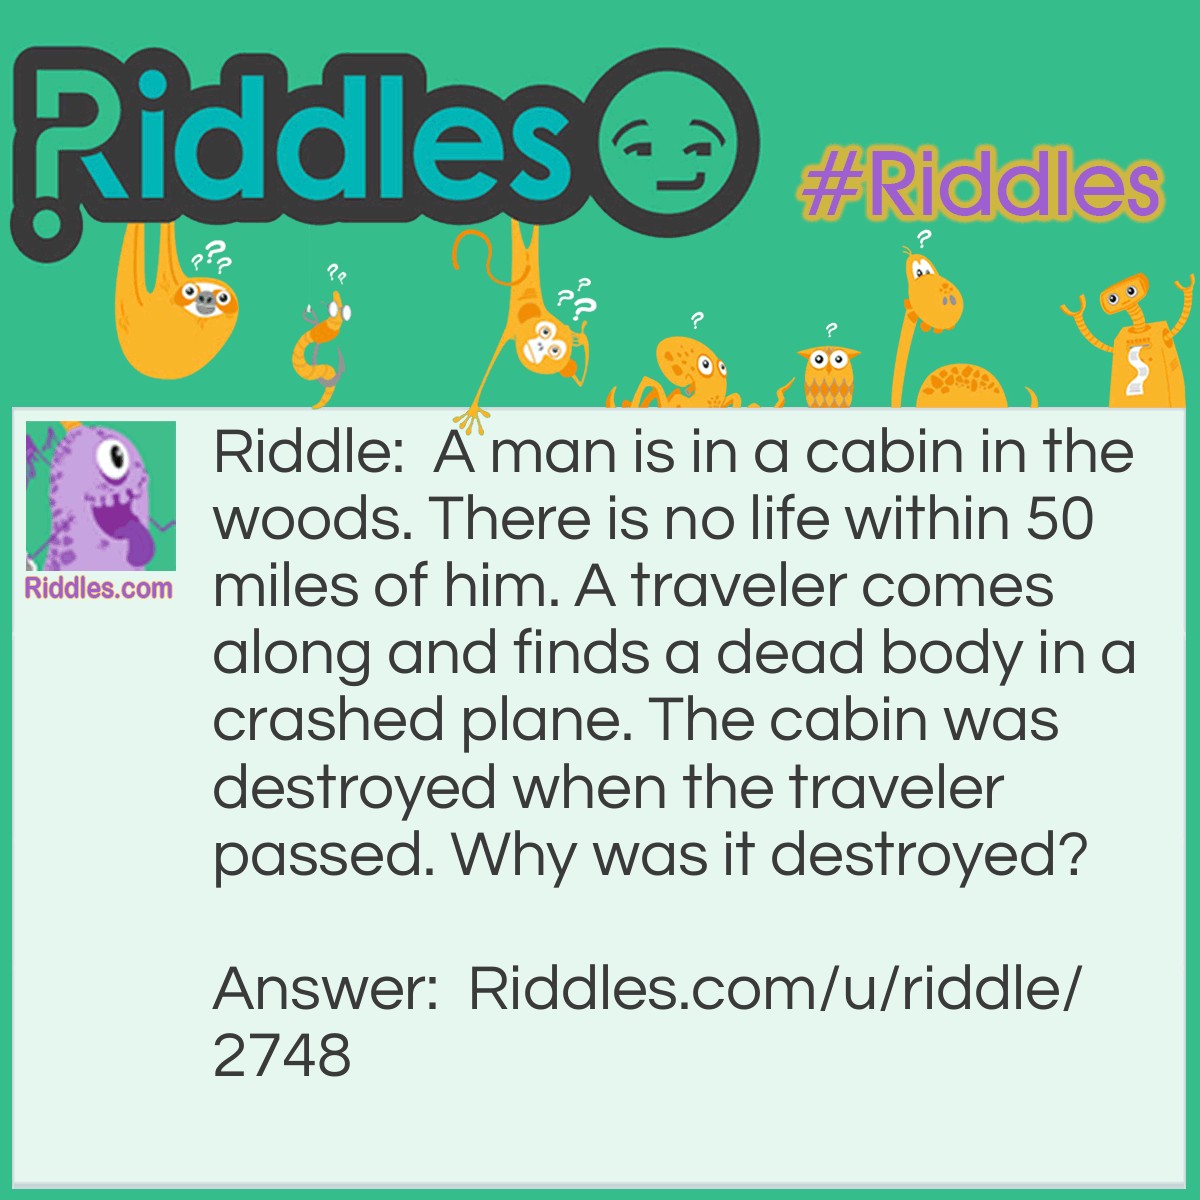 Riddle: A man is in a cabin in the woods. There is no life within 50 miles of him. A traveler comes along and finds a dead body in a crashed plane. The cabin was destroyed when the traveler passed. Why was it destroyed? Answer: The pilot crashed the plane.